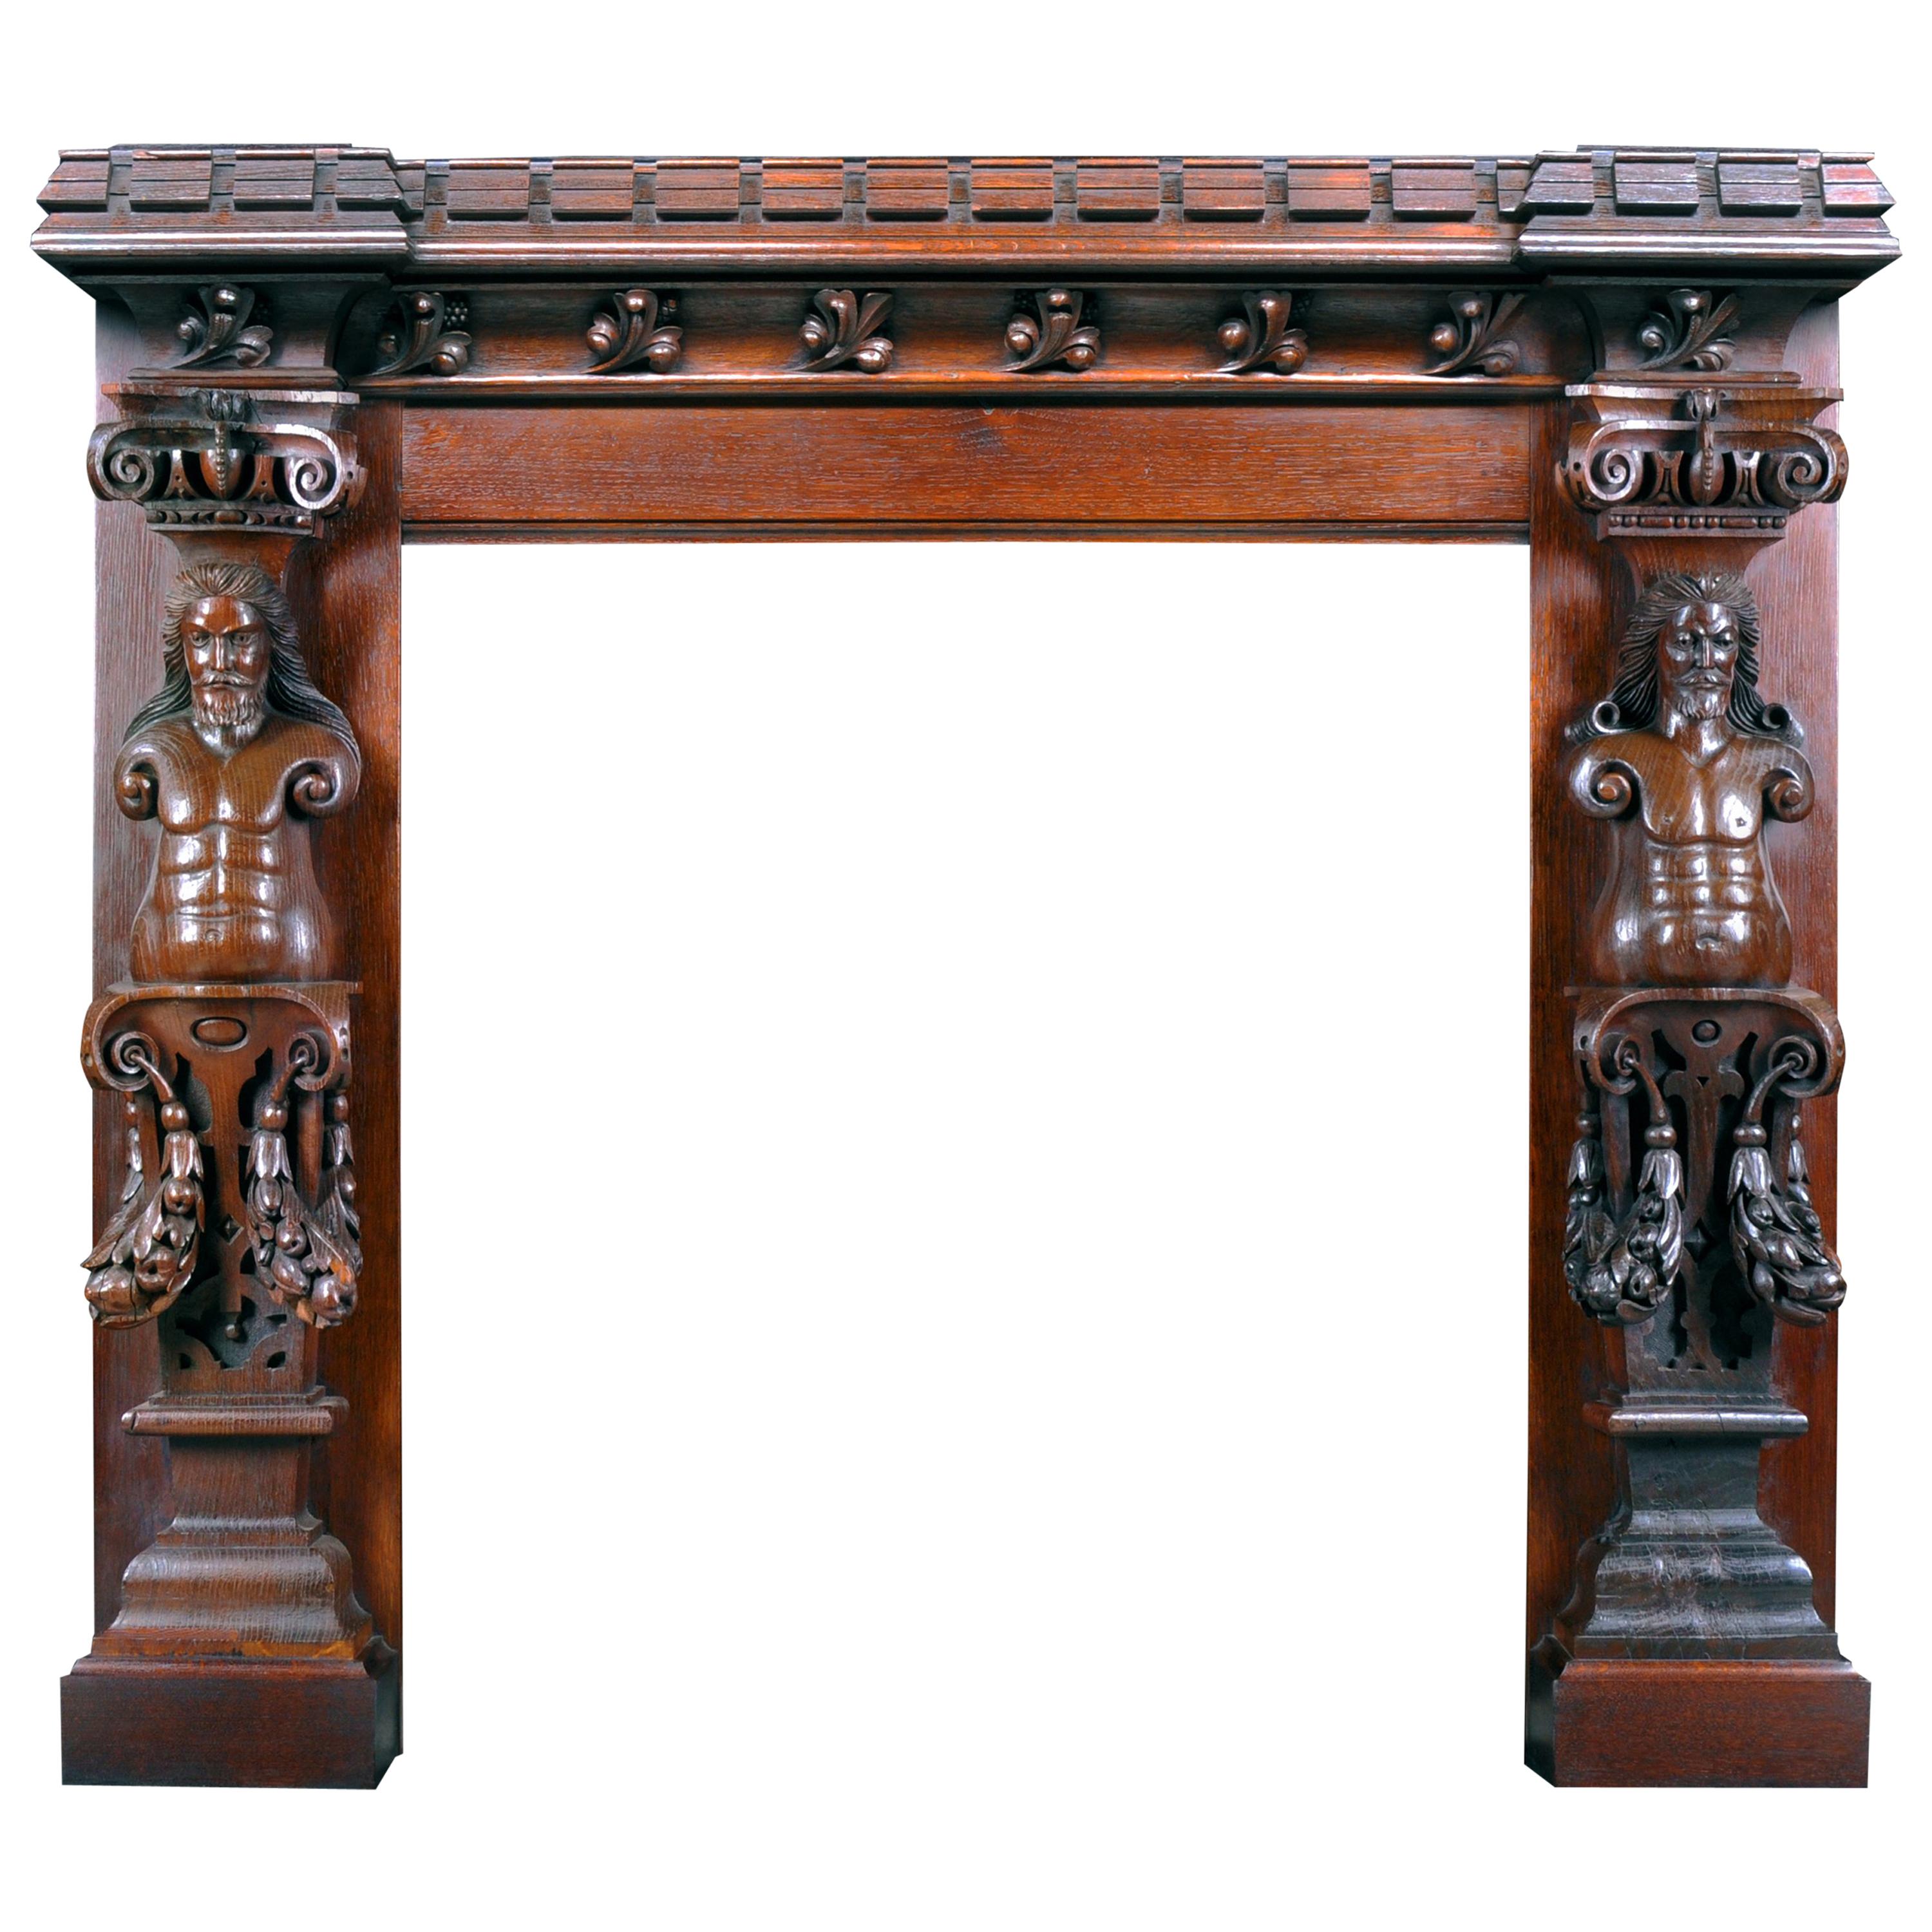 Castellated Jacobean Revival Style Antique Carved Oak Fireplace Mantel For Sale